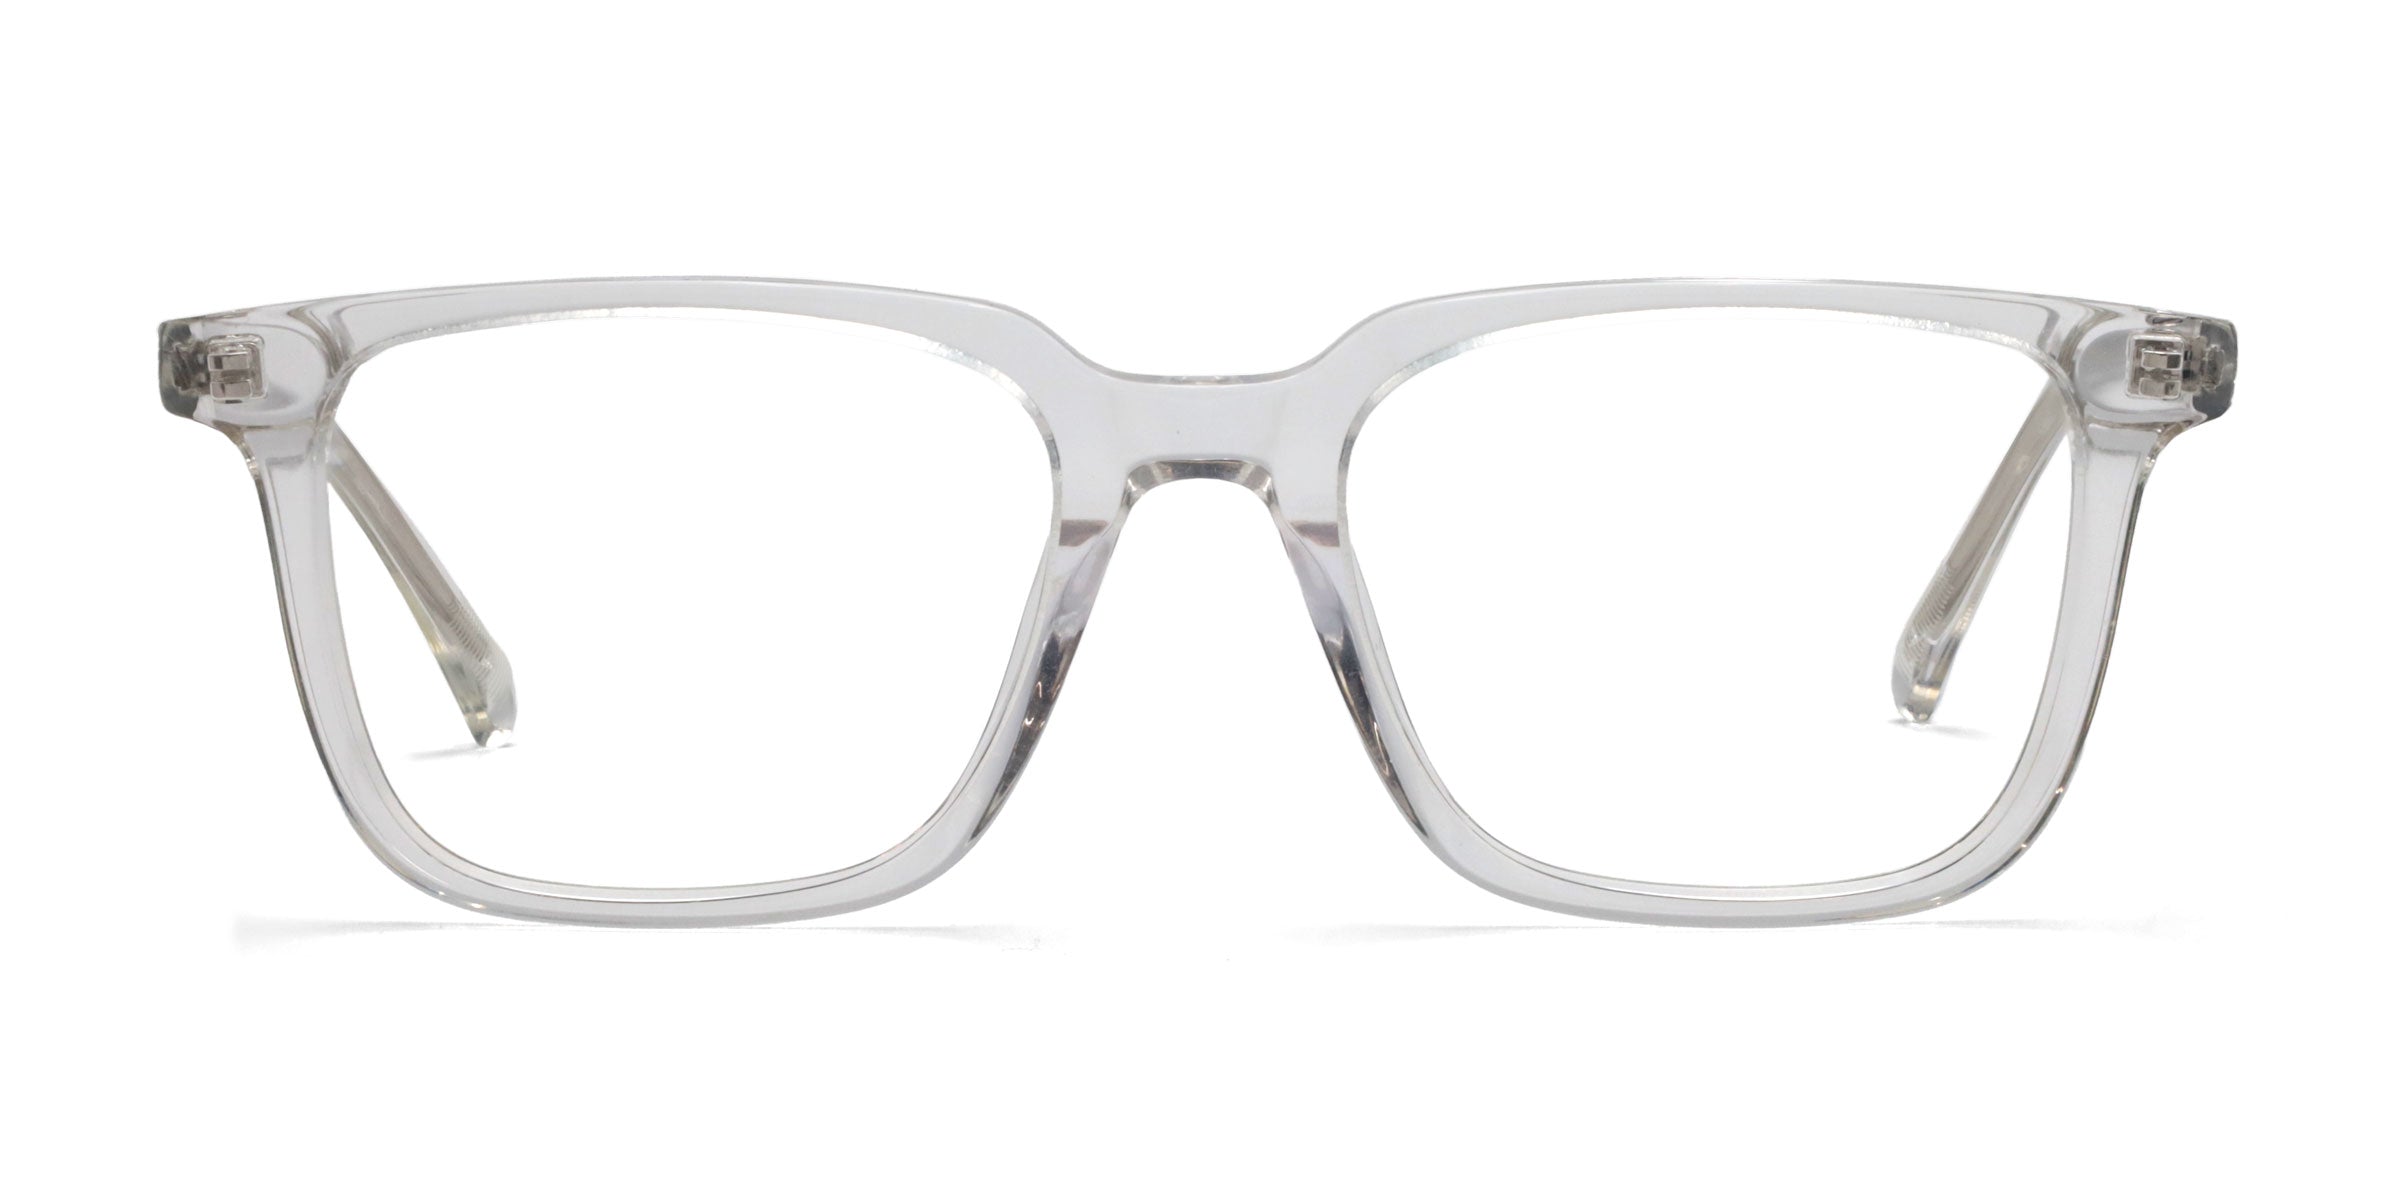 Hype Round Black eyeglasses frames front view